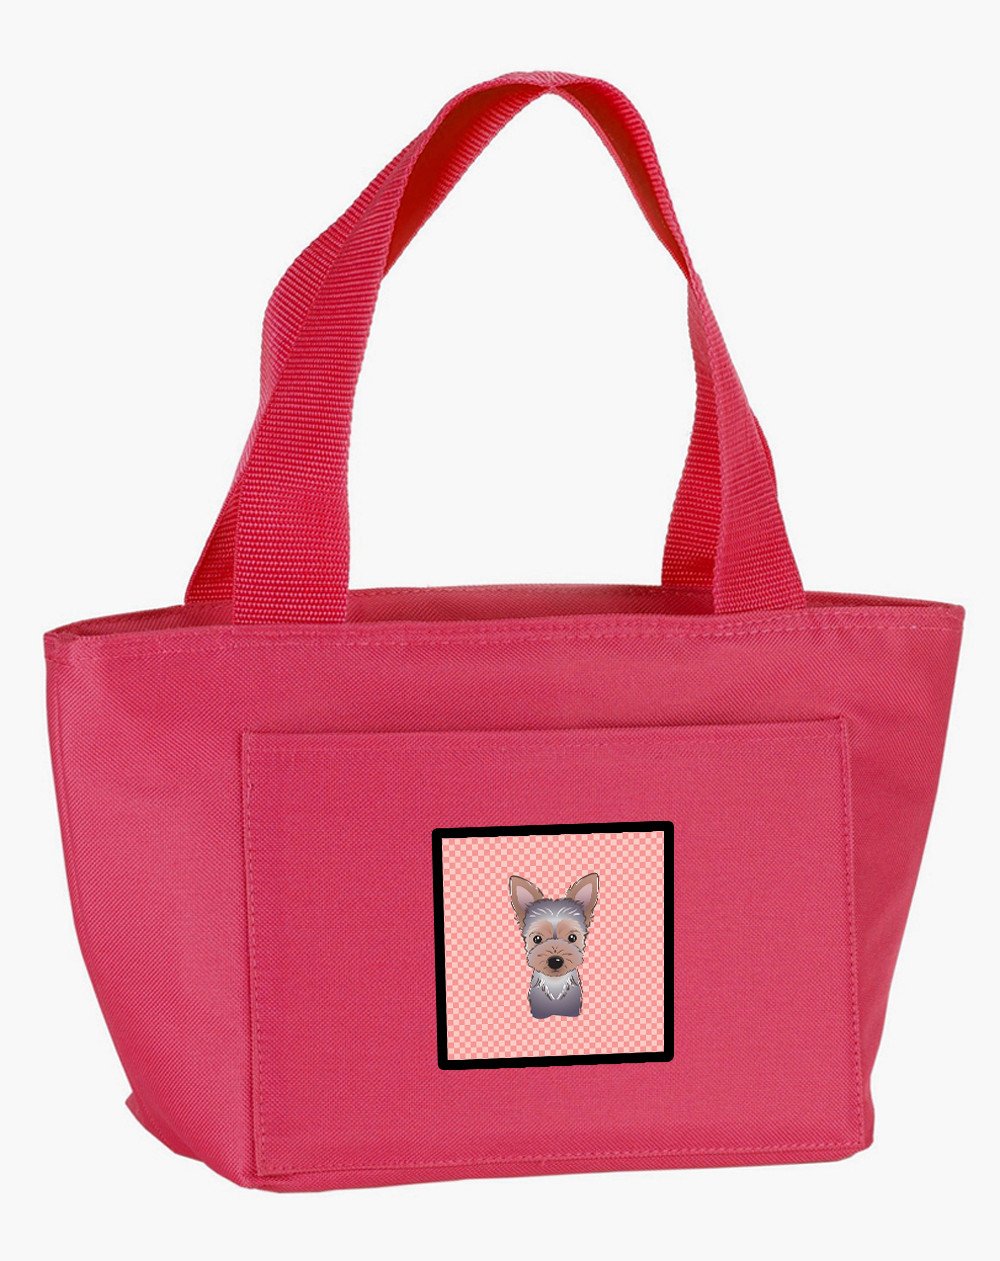 Checkerboard Pink Yorkie Puppy Lunch Bag BB1232PK-8808 by Caroline's Treasures